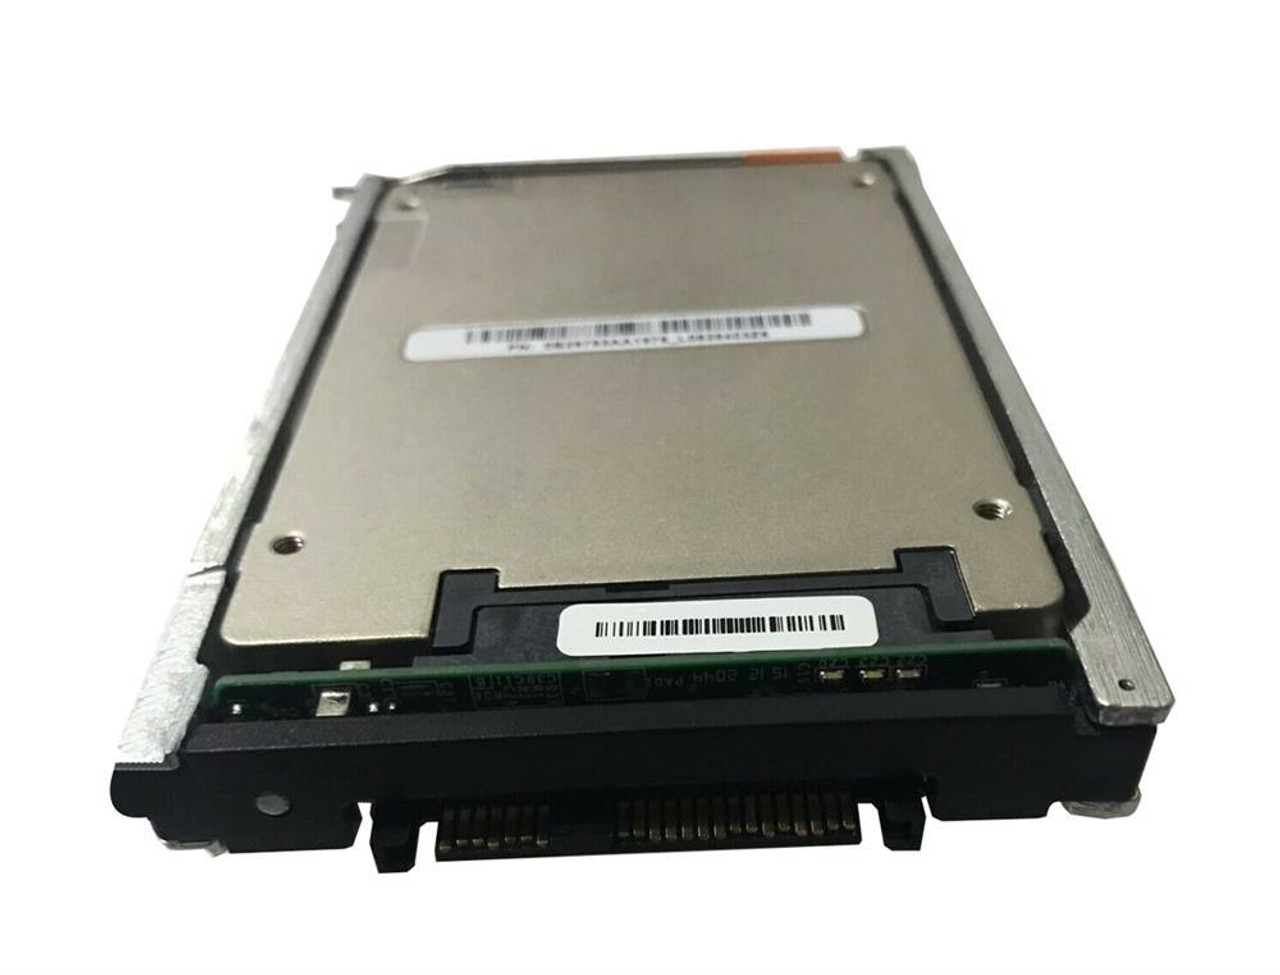 T4-2SFXL-1600 EMC 1.6TB SAS 12Gbps Flash 2.5-inch Internal Solid State Drive (SSD) for 25 x 2.5 Enclosure